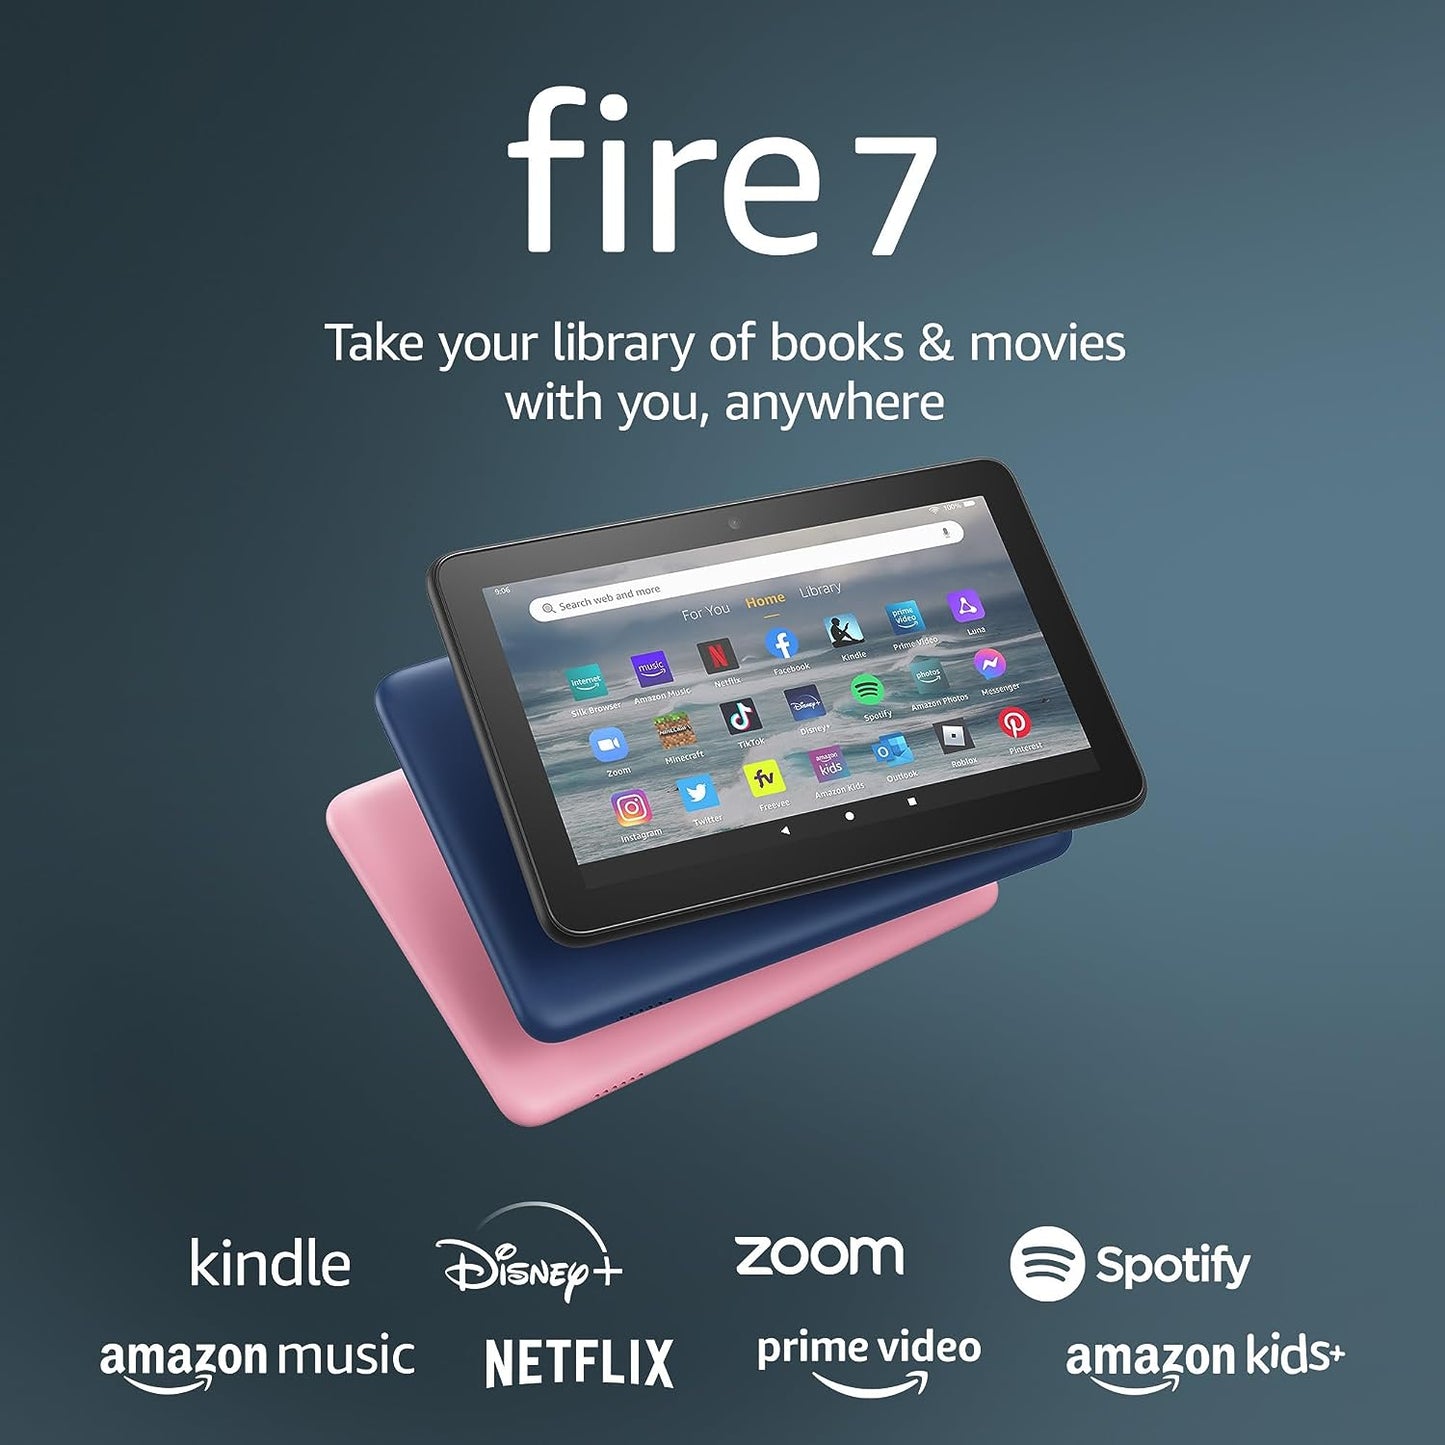 Amazon Fire 7 tablet, 7” display, read and watch, 16 GB